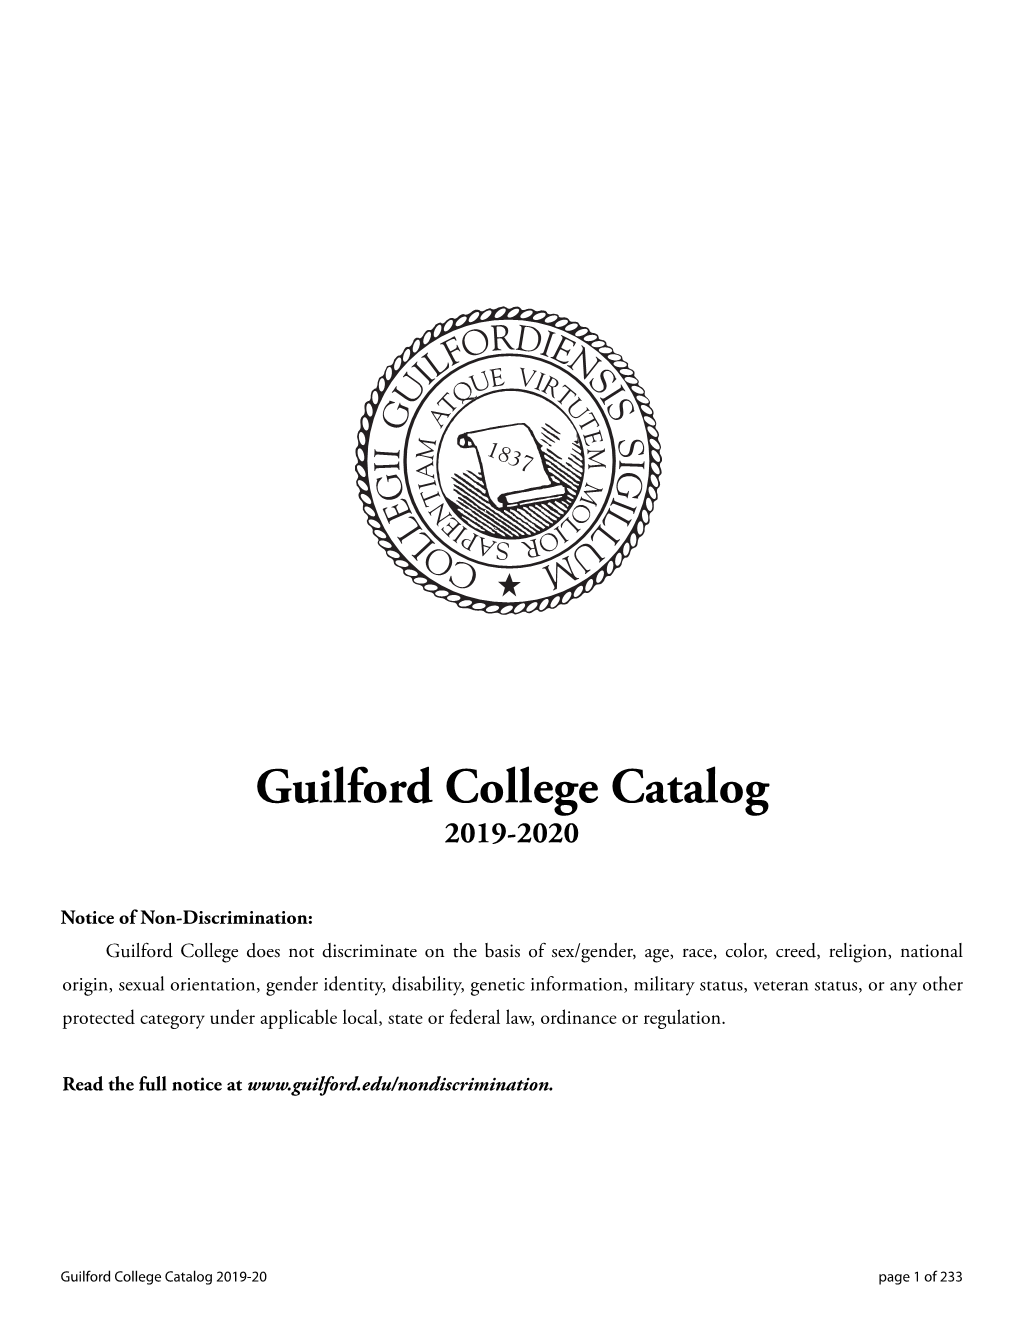 Guilford College Catalog 2019-2020